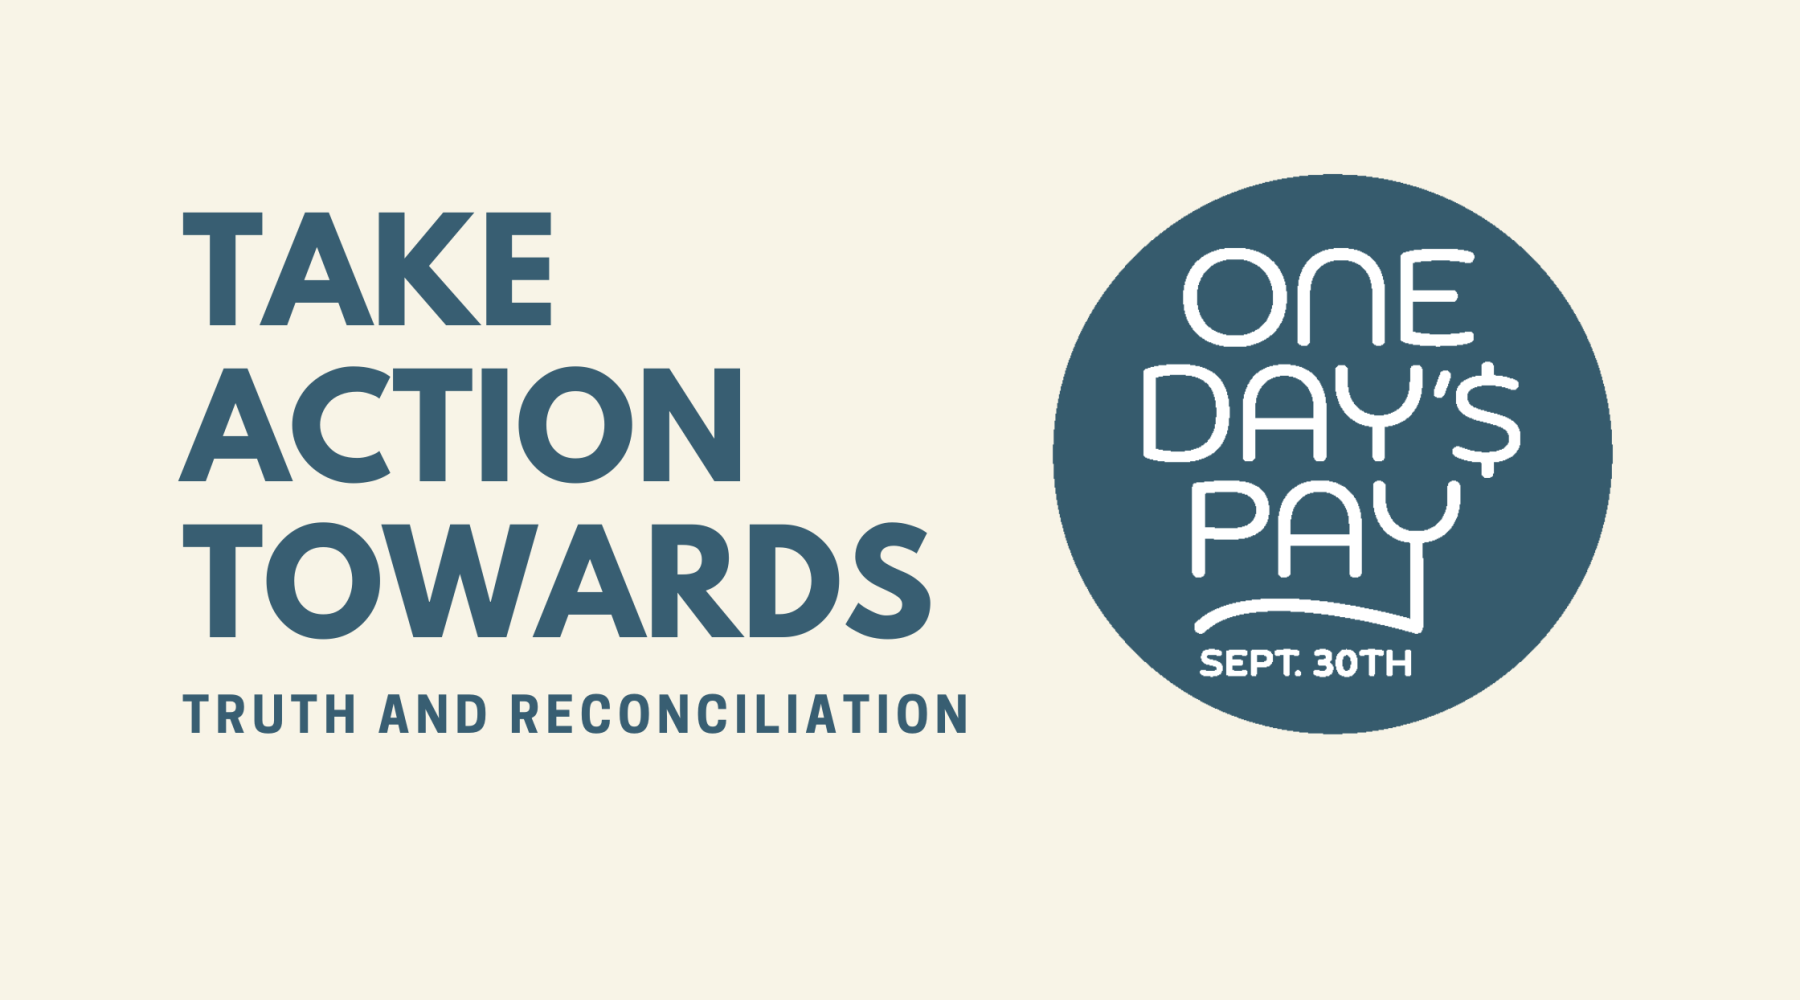 Cream background with text reading "Take Action Towards Truth and Reconciliation" with the One Day's Pay logo beside it